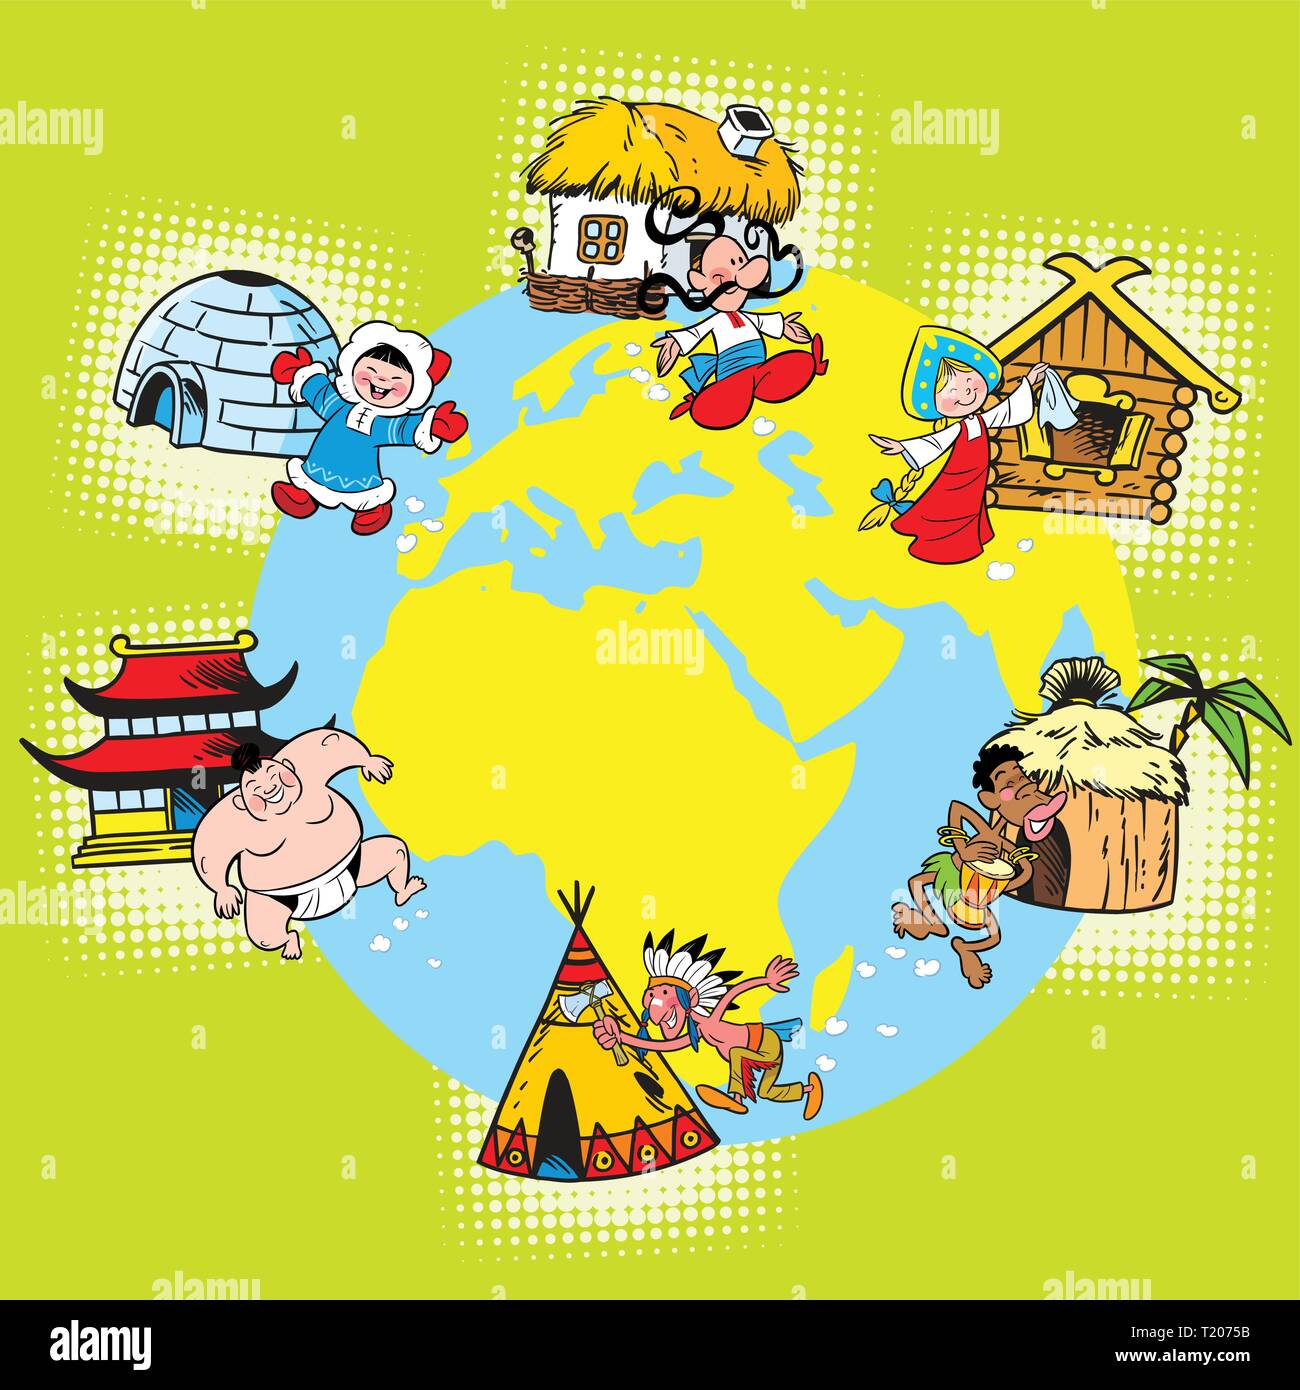 The illustration shows the different races and peoples of the world and their homes. Illustration is on separate layers, in cartoon style. Stock Vector